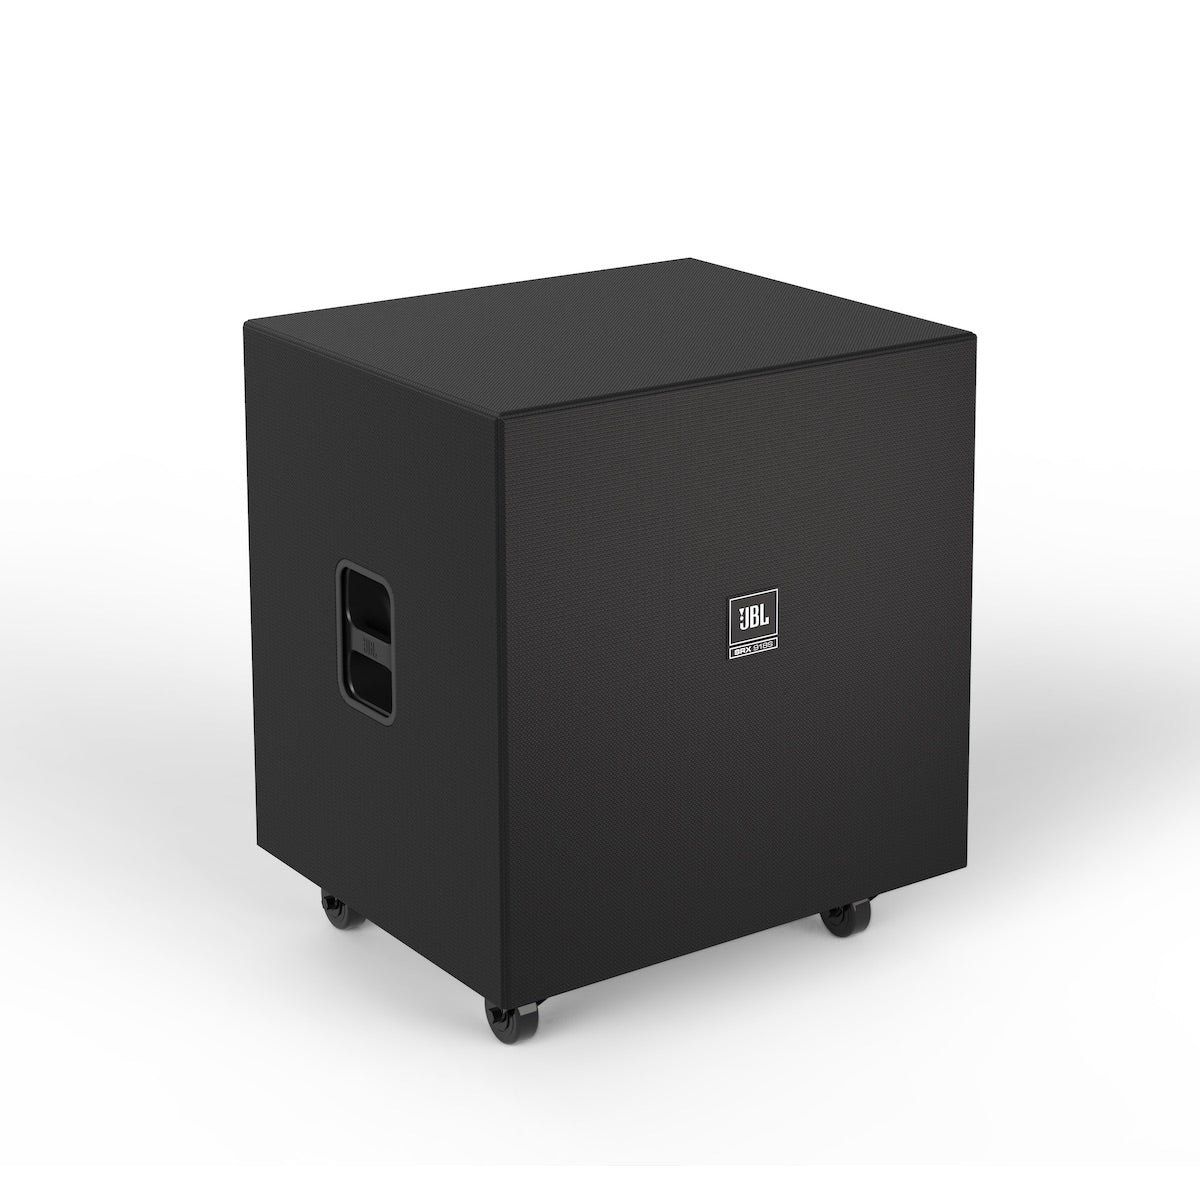 JBL SRX918S - Single 18-inch Powered Subwoofer, with Accessory Wheels and Cover Kit